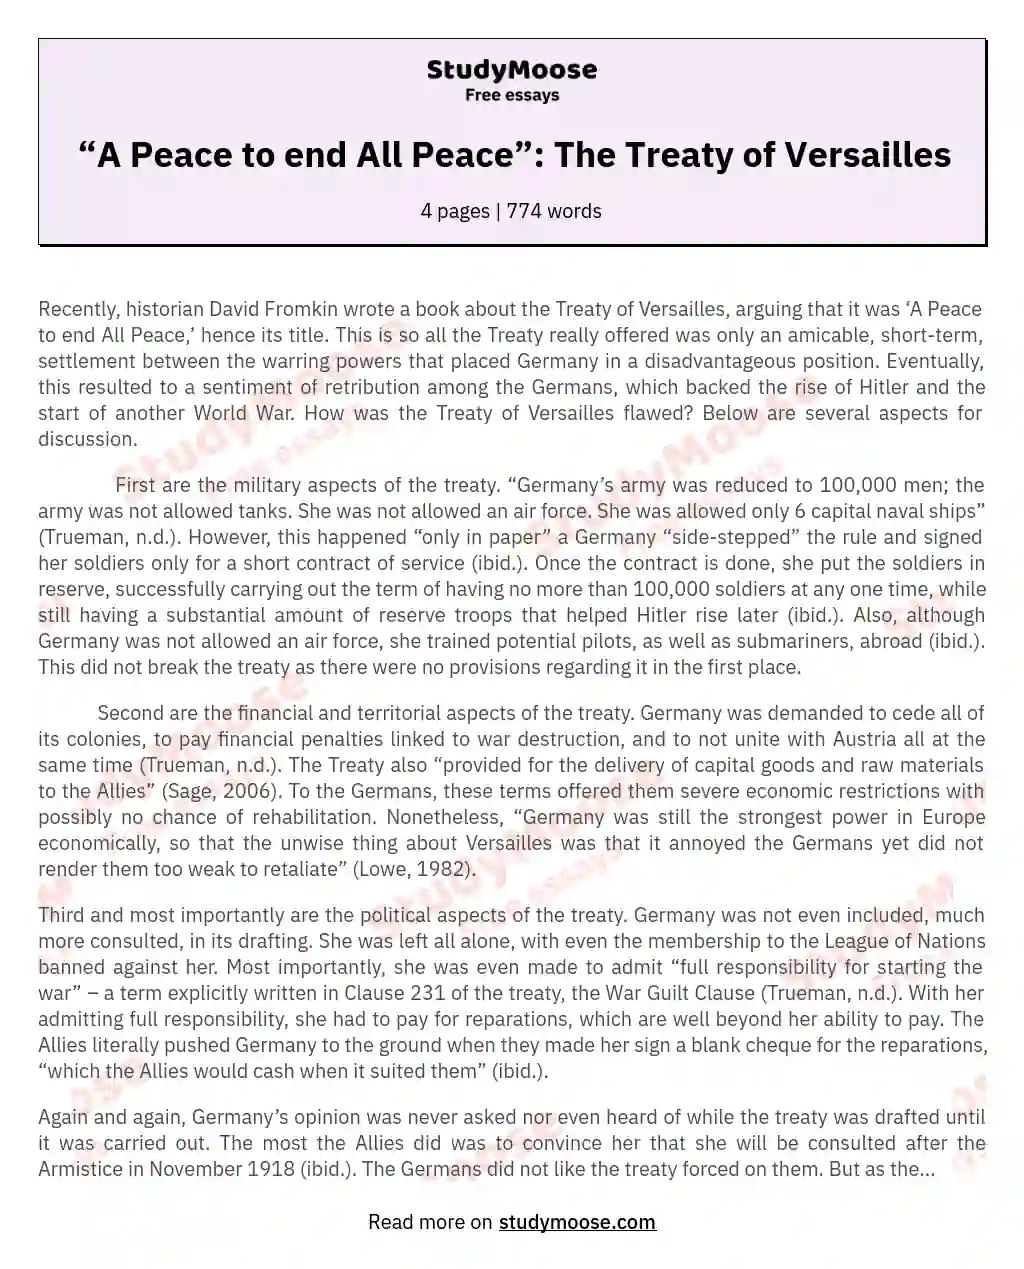 “A Peace to end All Peace”: The Treaty of Versailles